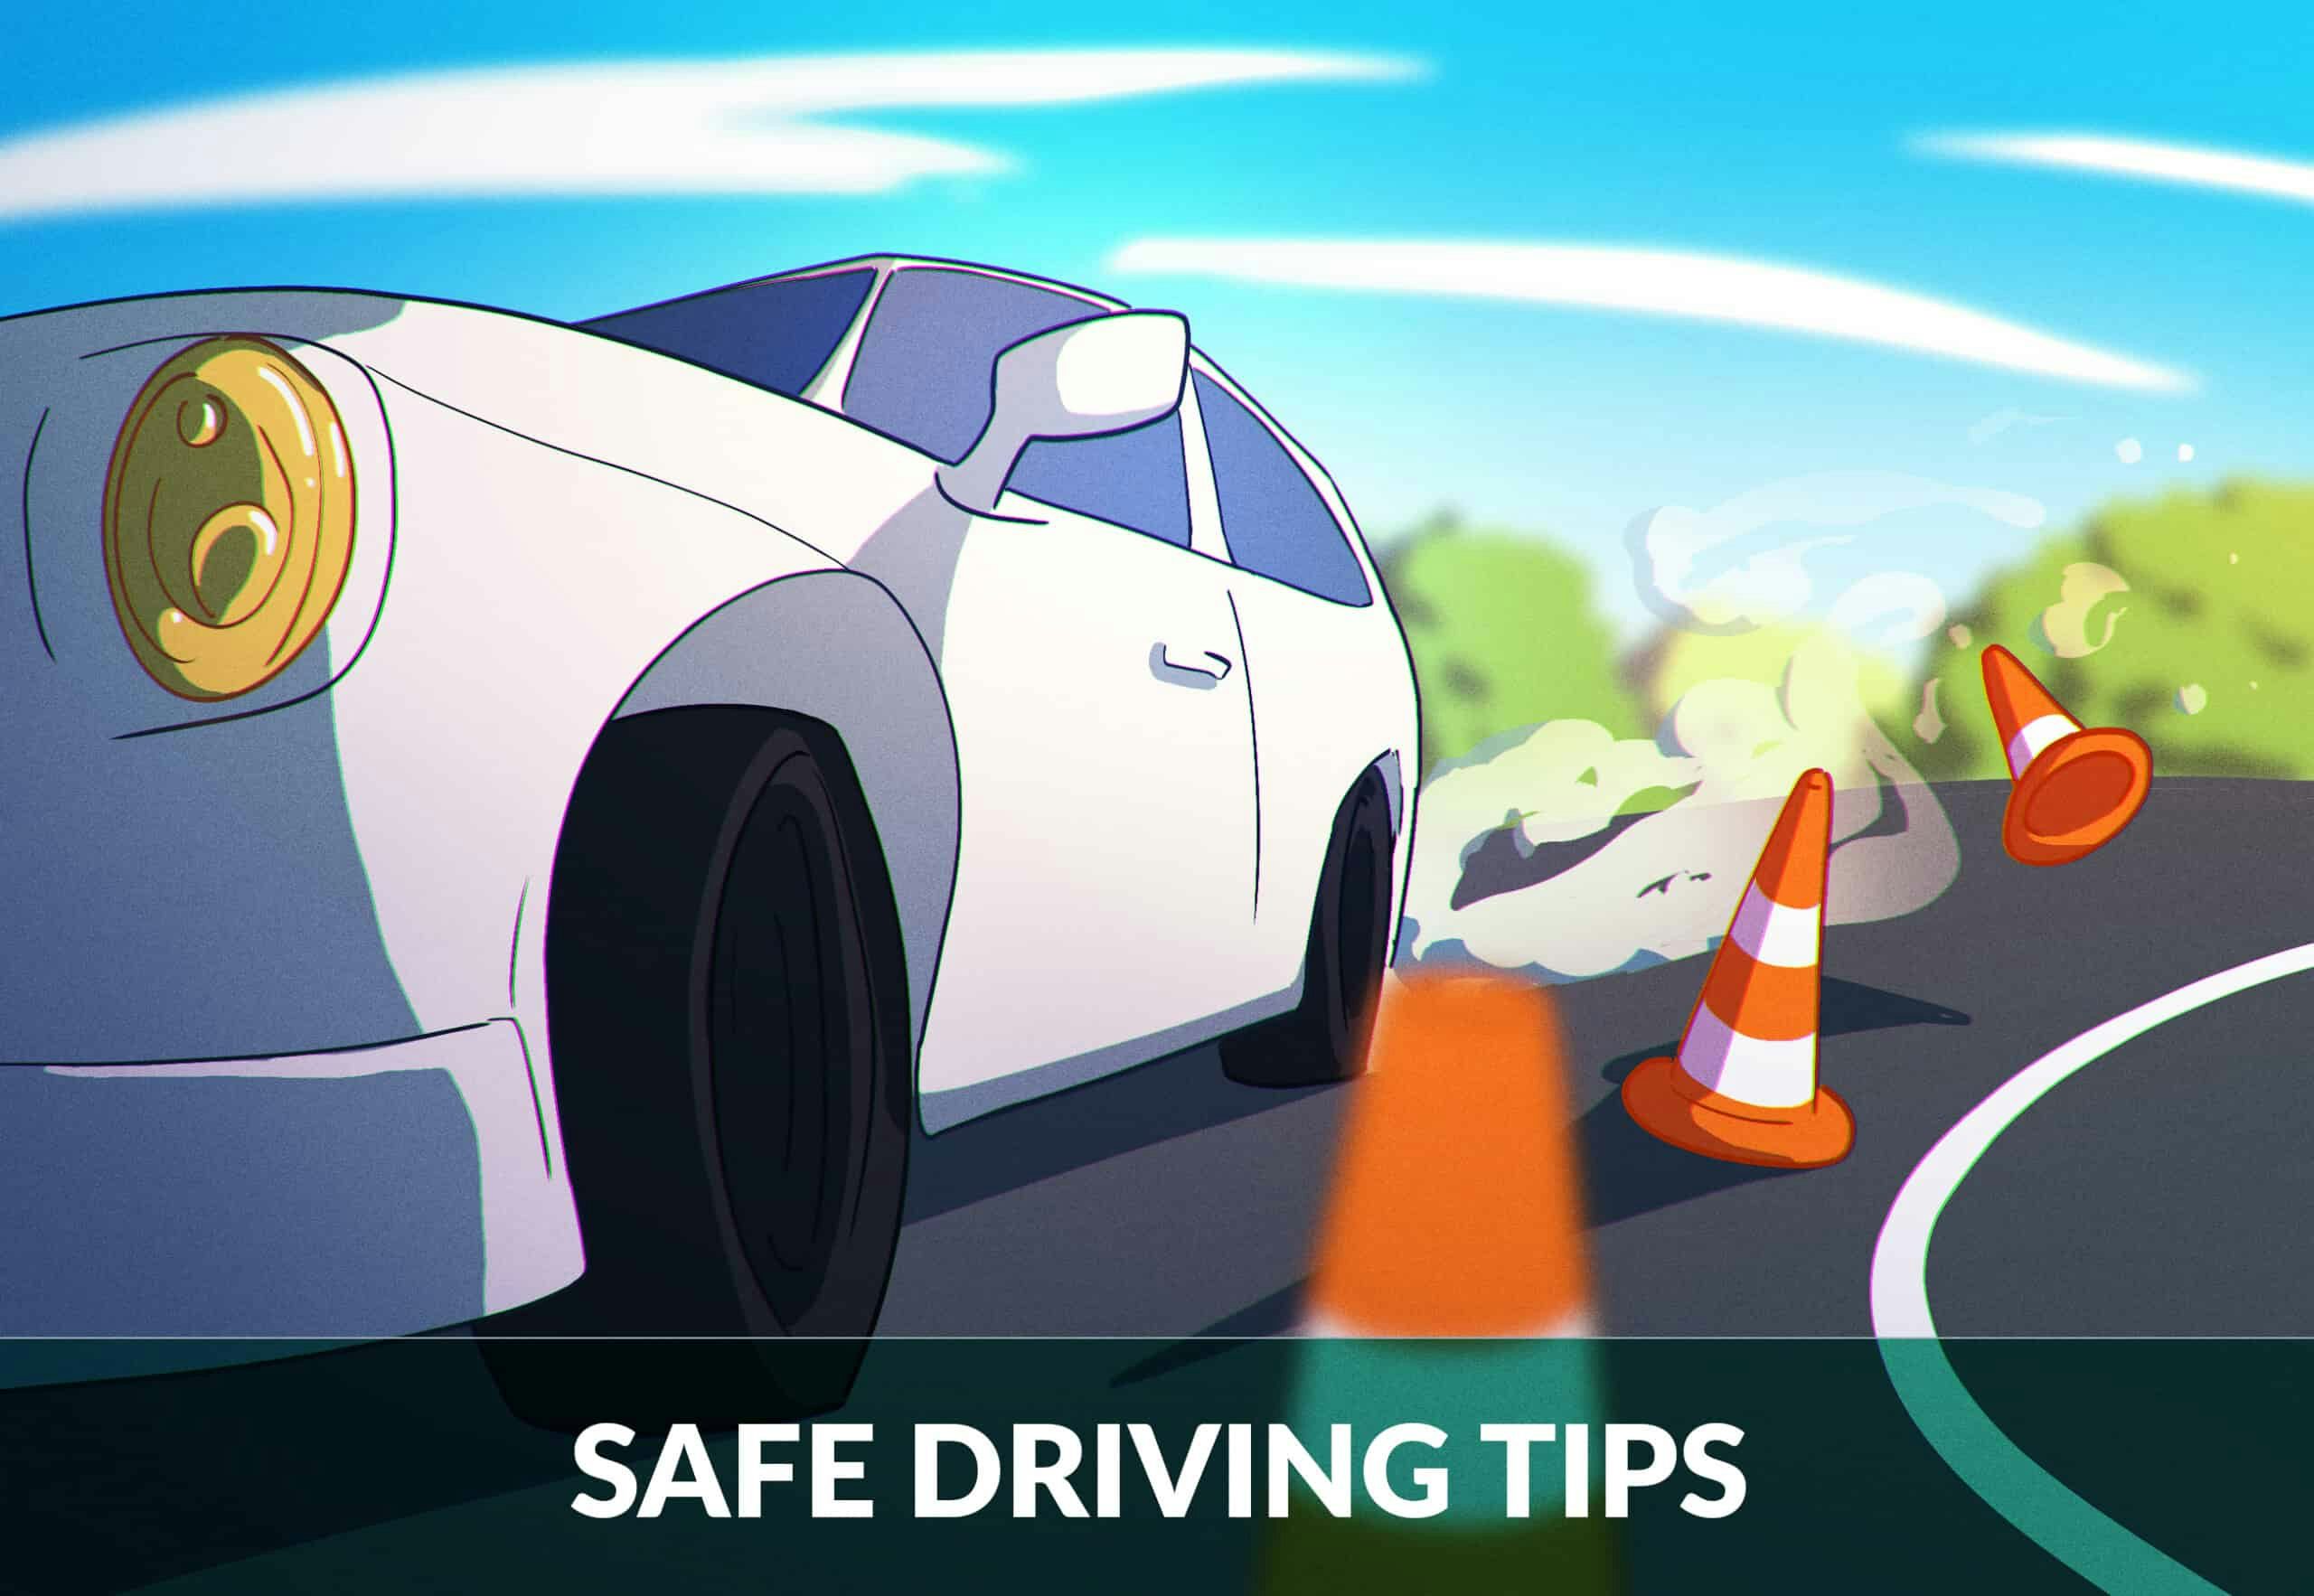 Expert Tips to Remain a Safe Driver Your Entire Driving Career